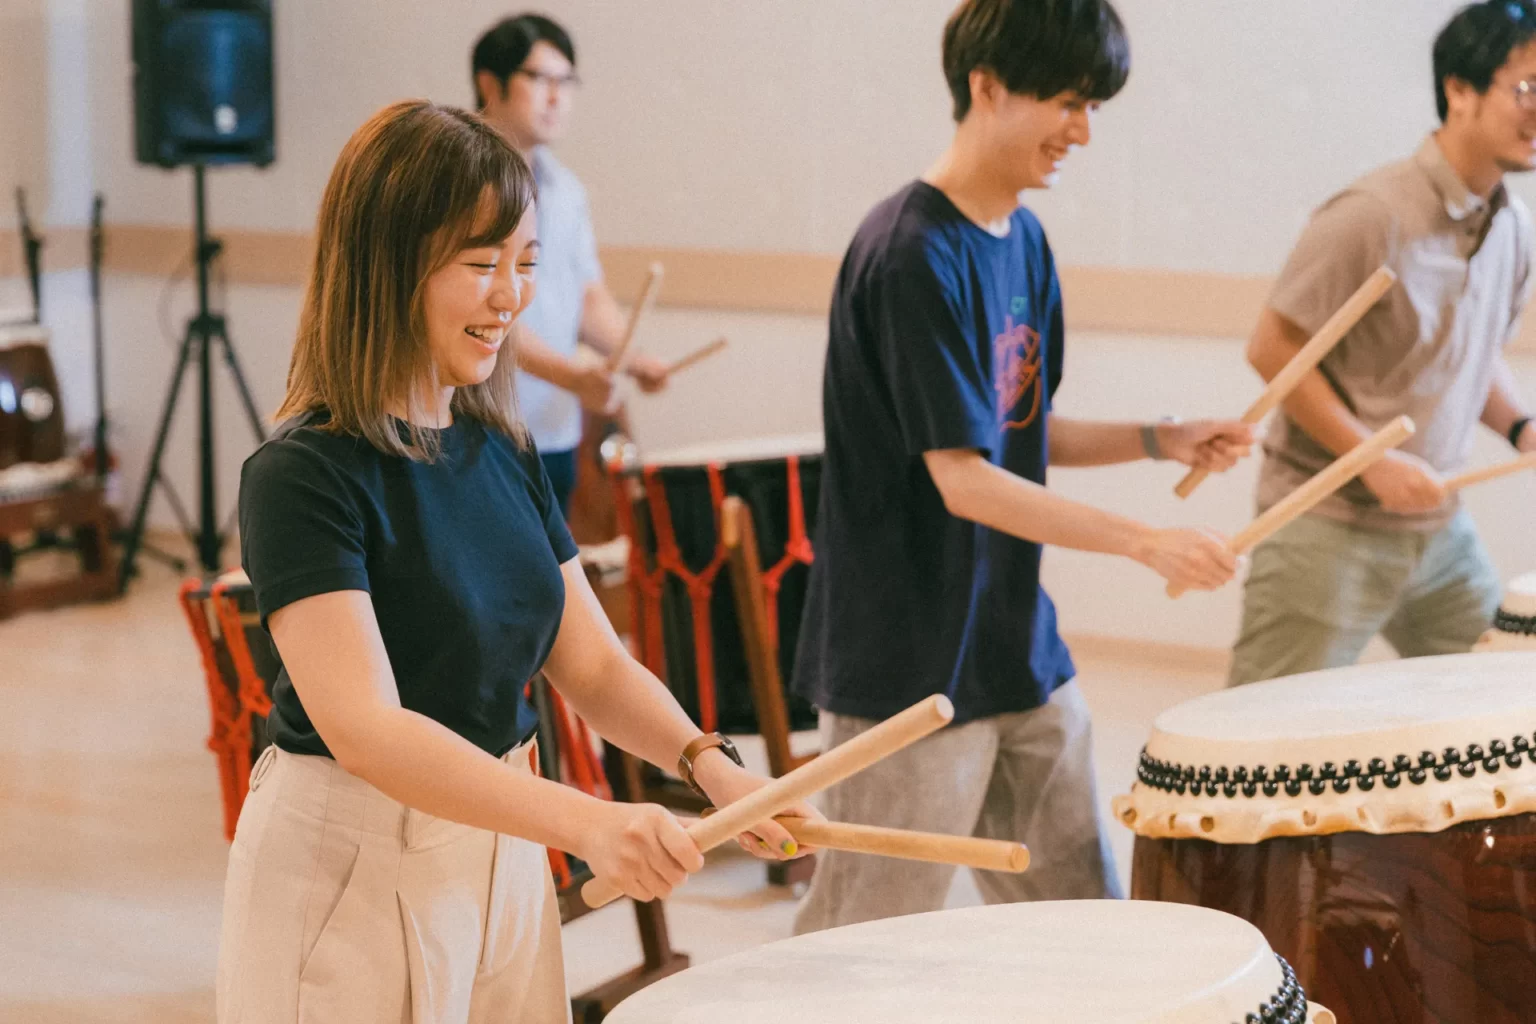 We offer one-hour workshops and games using taiko for corporate and municipal team building.